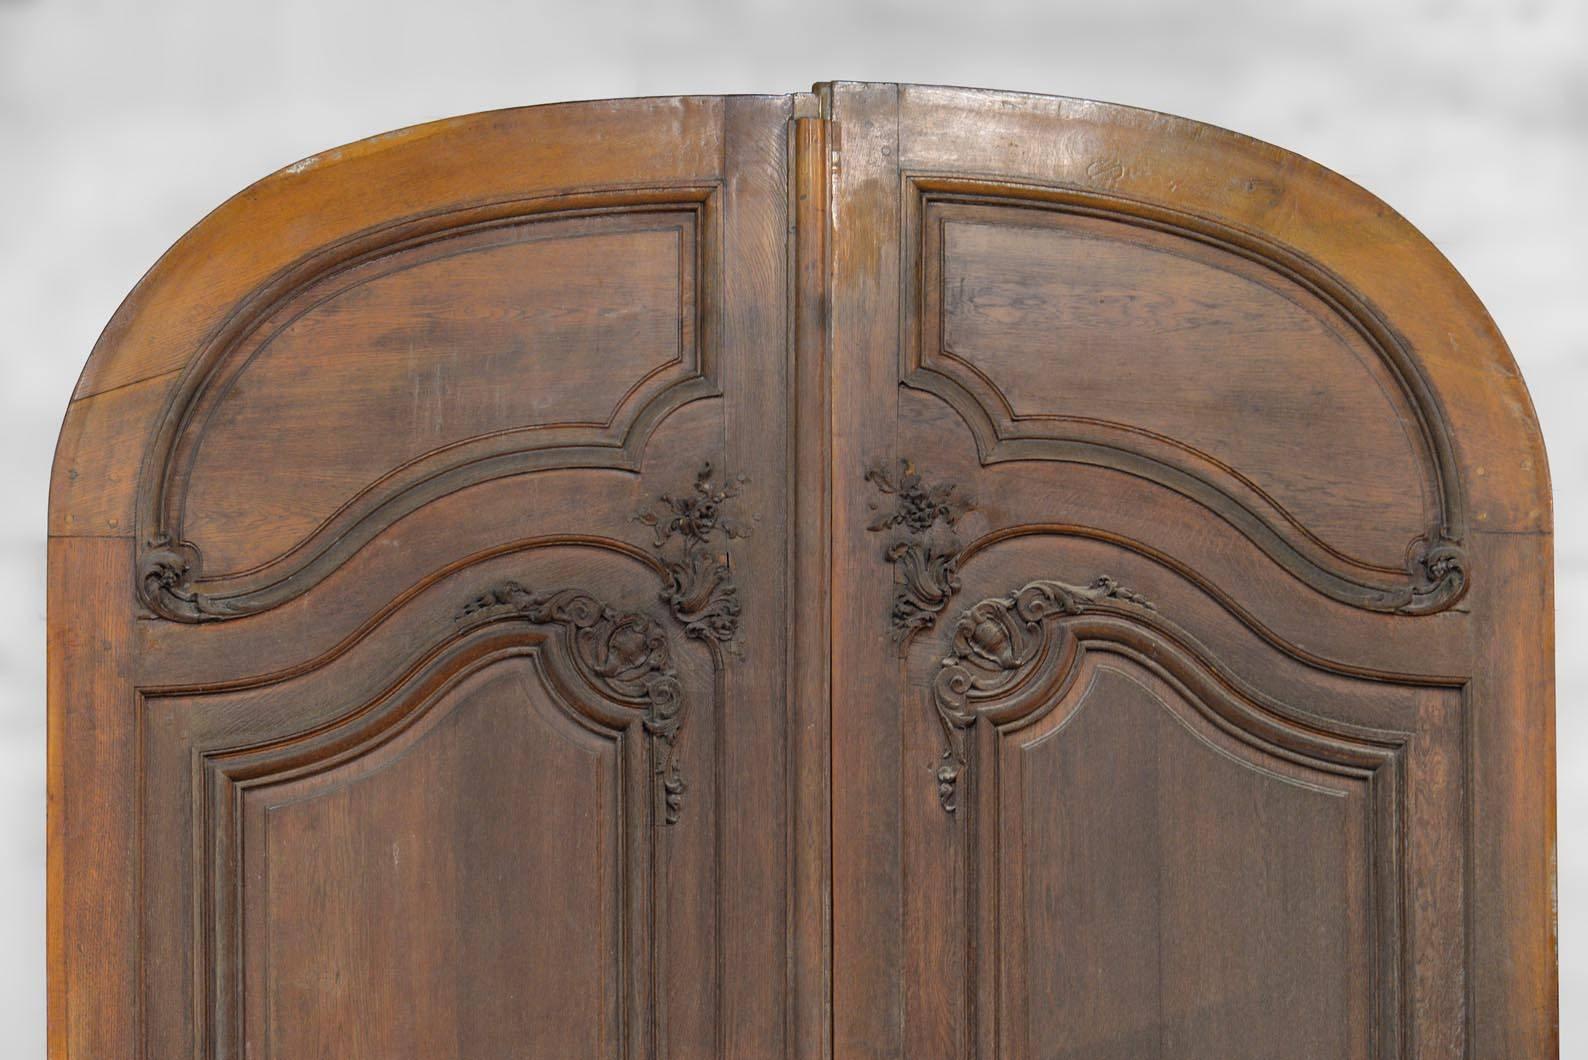 These high oak doors were built in the late 19th century. In very good condition, the details were carefully executed:Fine moldings discretely rhythm the structure, as well as the inlaid marquetry panels at the bottom of the doors. The sleek design